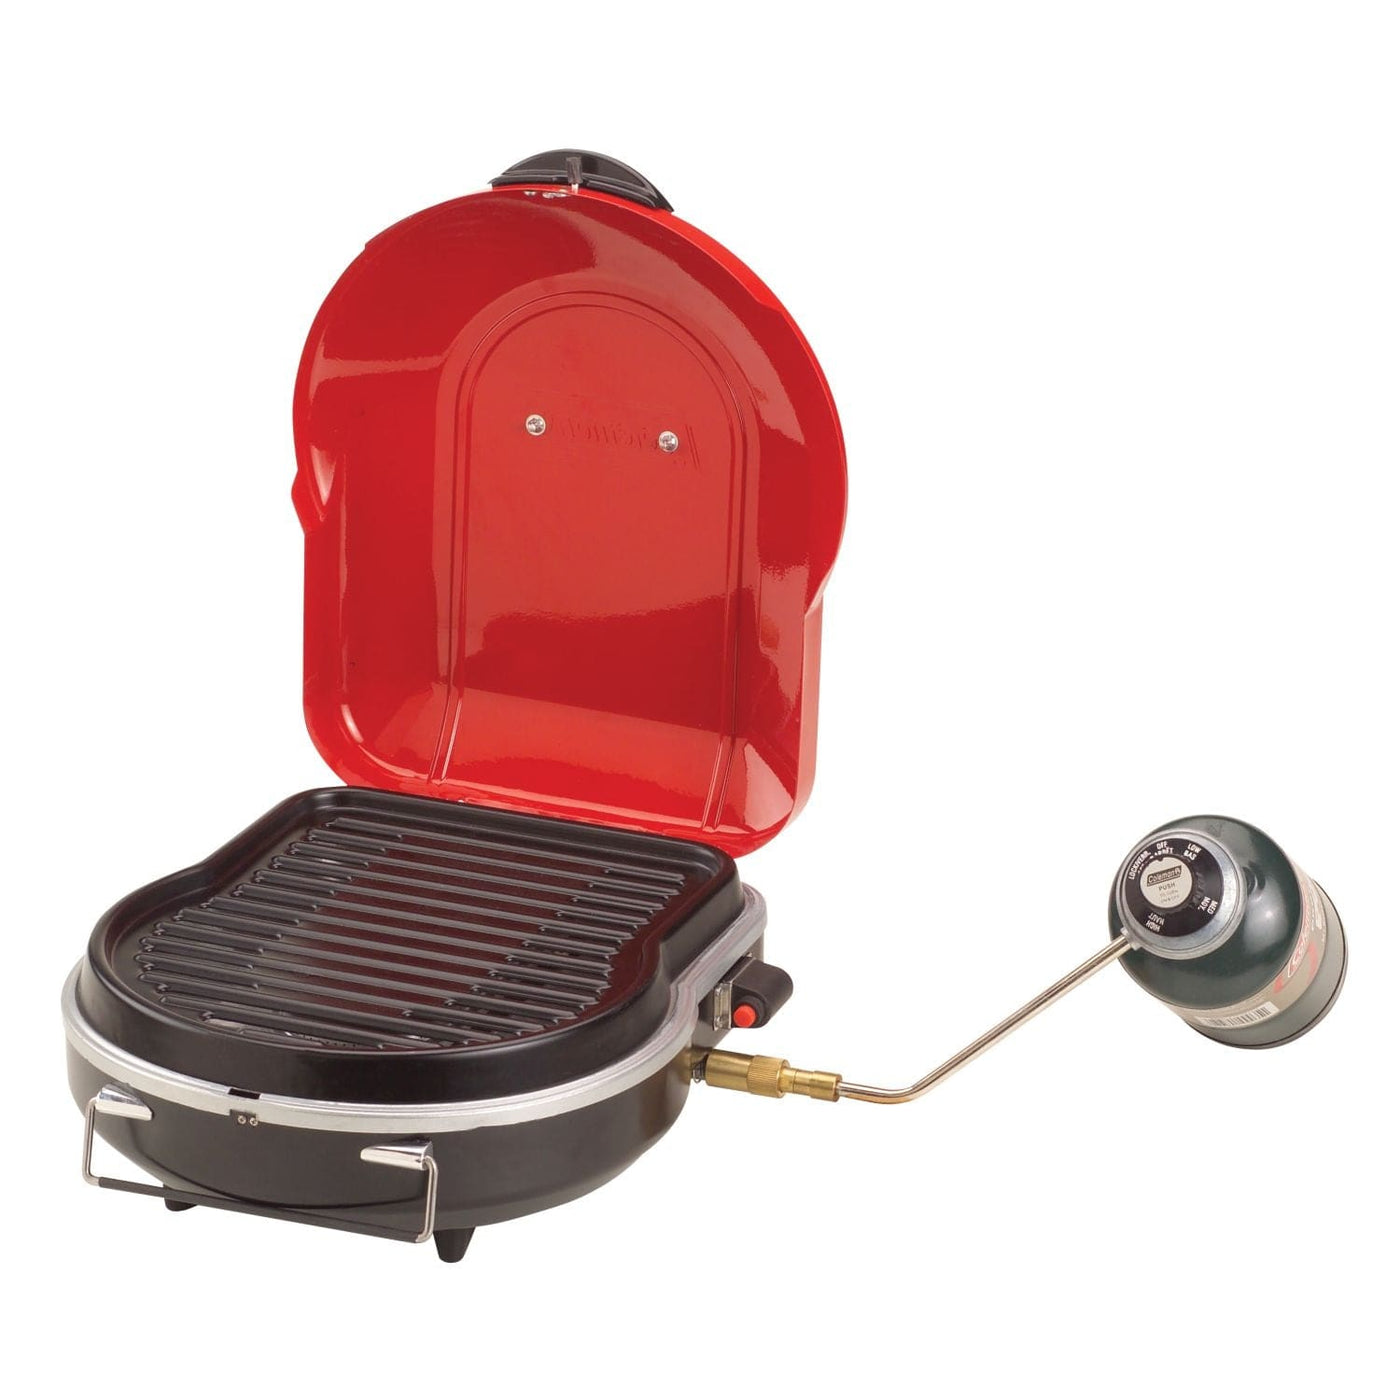 Coleman Coleman Fold-N-Go Propane Grill 1 Burner Camping And Outdoor